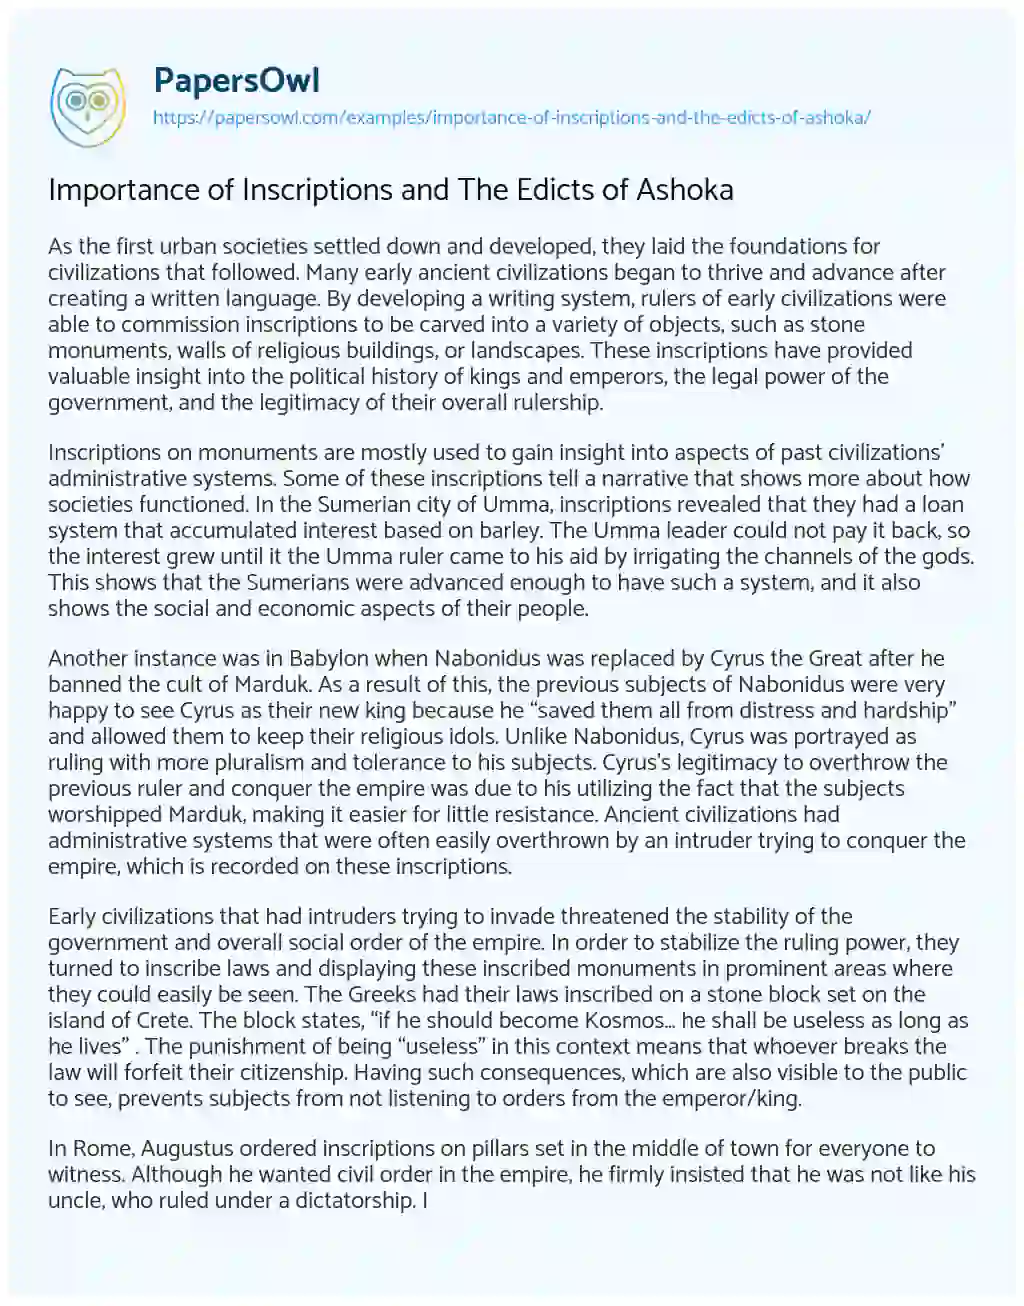 Essay on Importance of Inscriptions and the Edicts of Ashoka